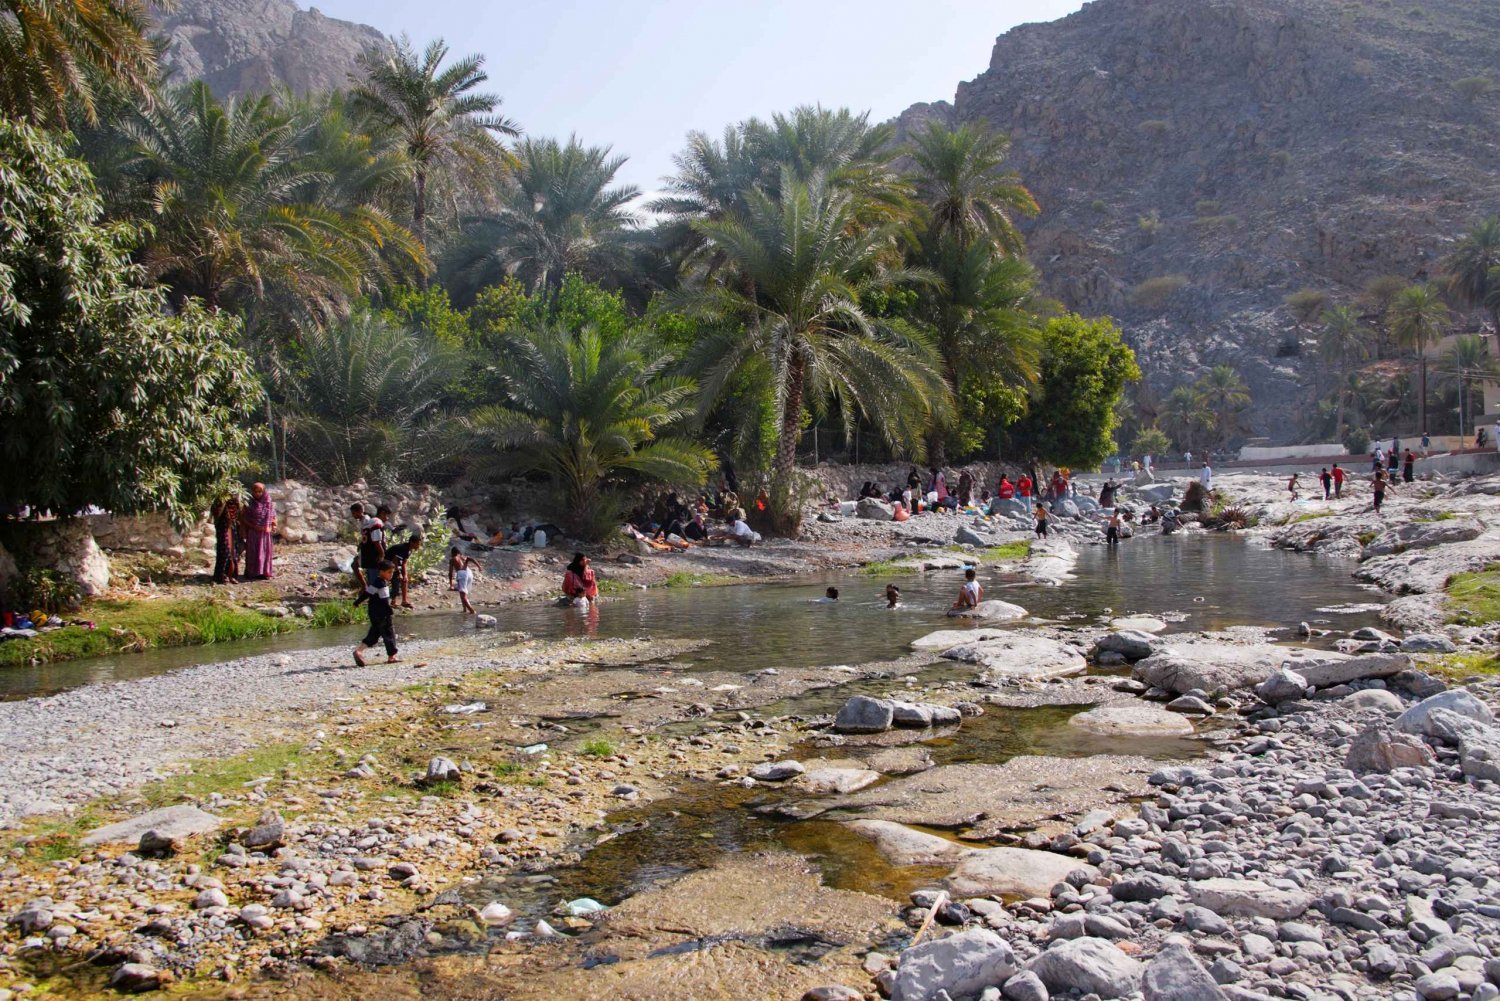 From Muscat: North Dunes Safari and Hot Spring Visit